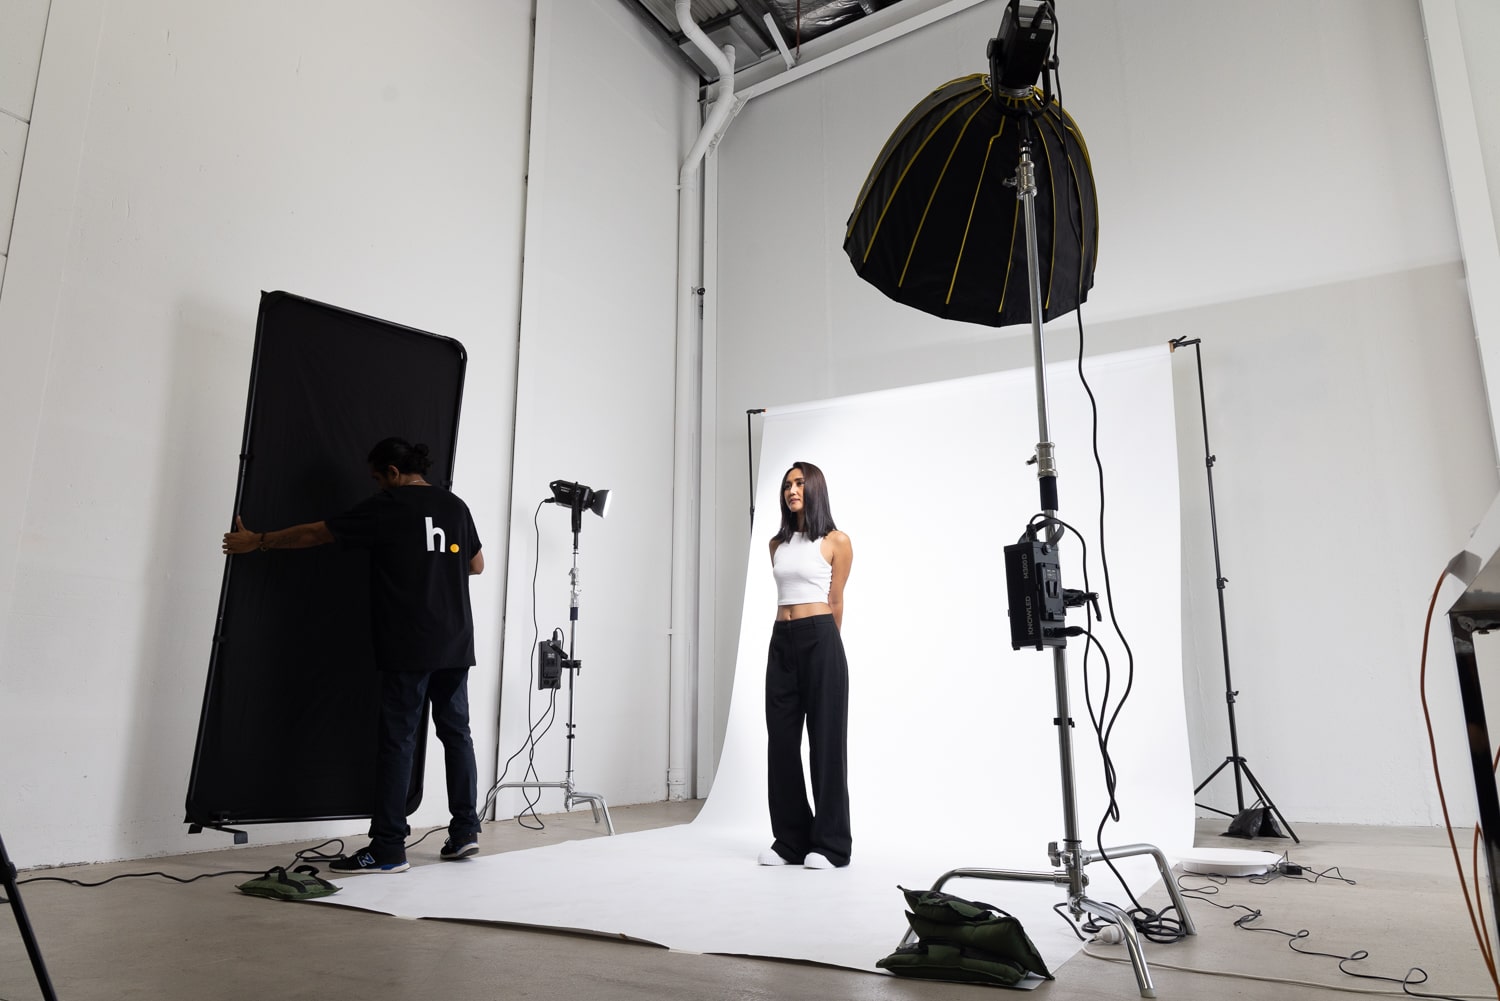 An image of a studio setup featuring a model standing on a seamless white paper backdrop, dressed in a white halter top and black pants. Beside the model, another photographer is setting up an Xpress v-flat backdrop. The studio is equipped with two professional lighting equipment, creating a well-lit environment for e-commerce fashion photography.